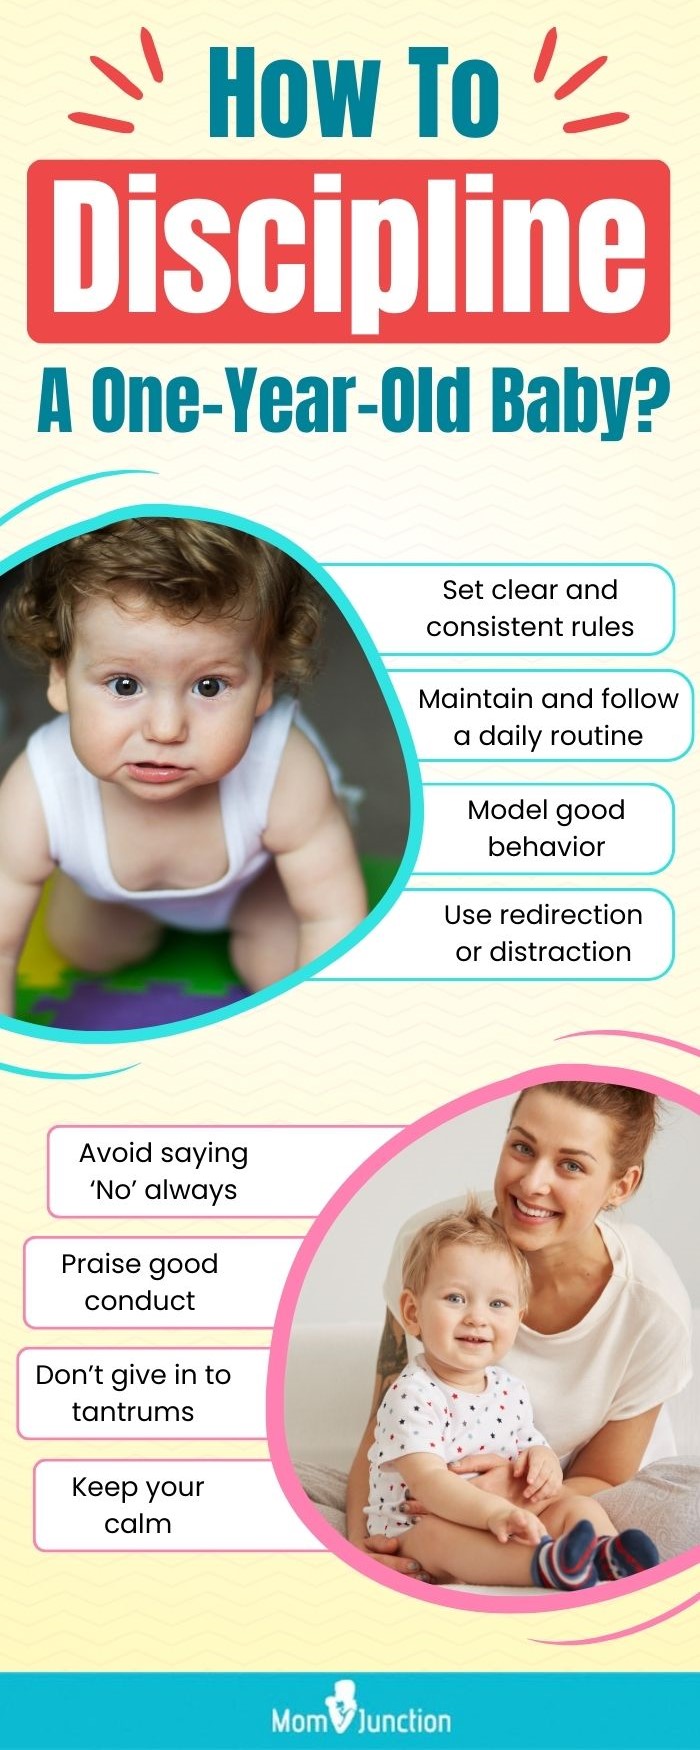 how to discipline a one year old baby (infographic)